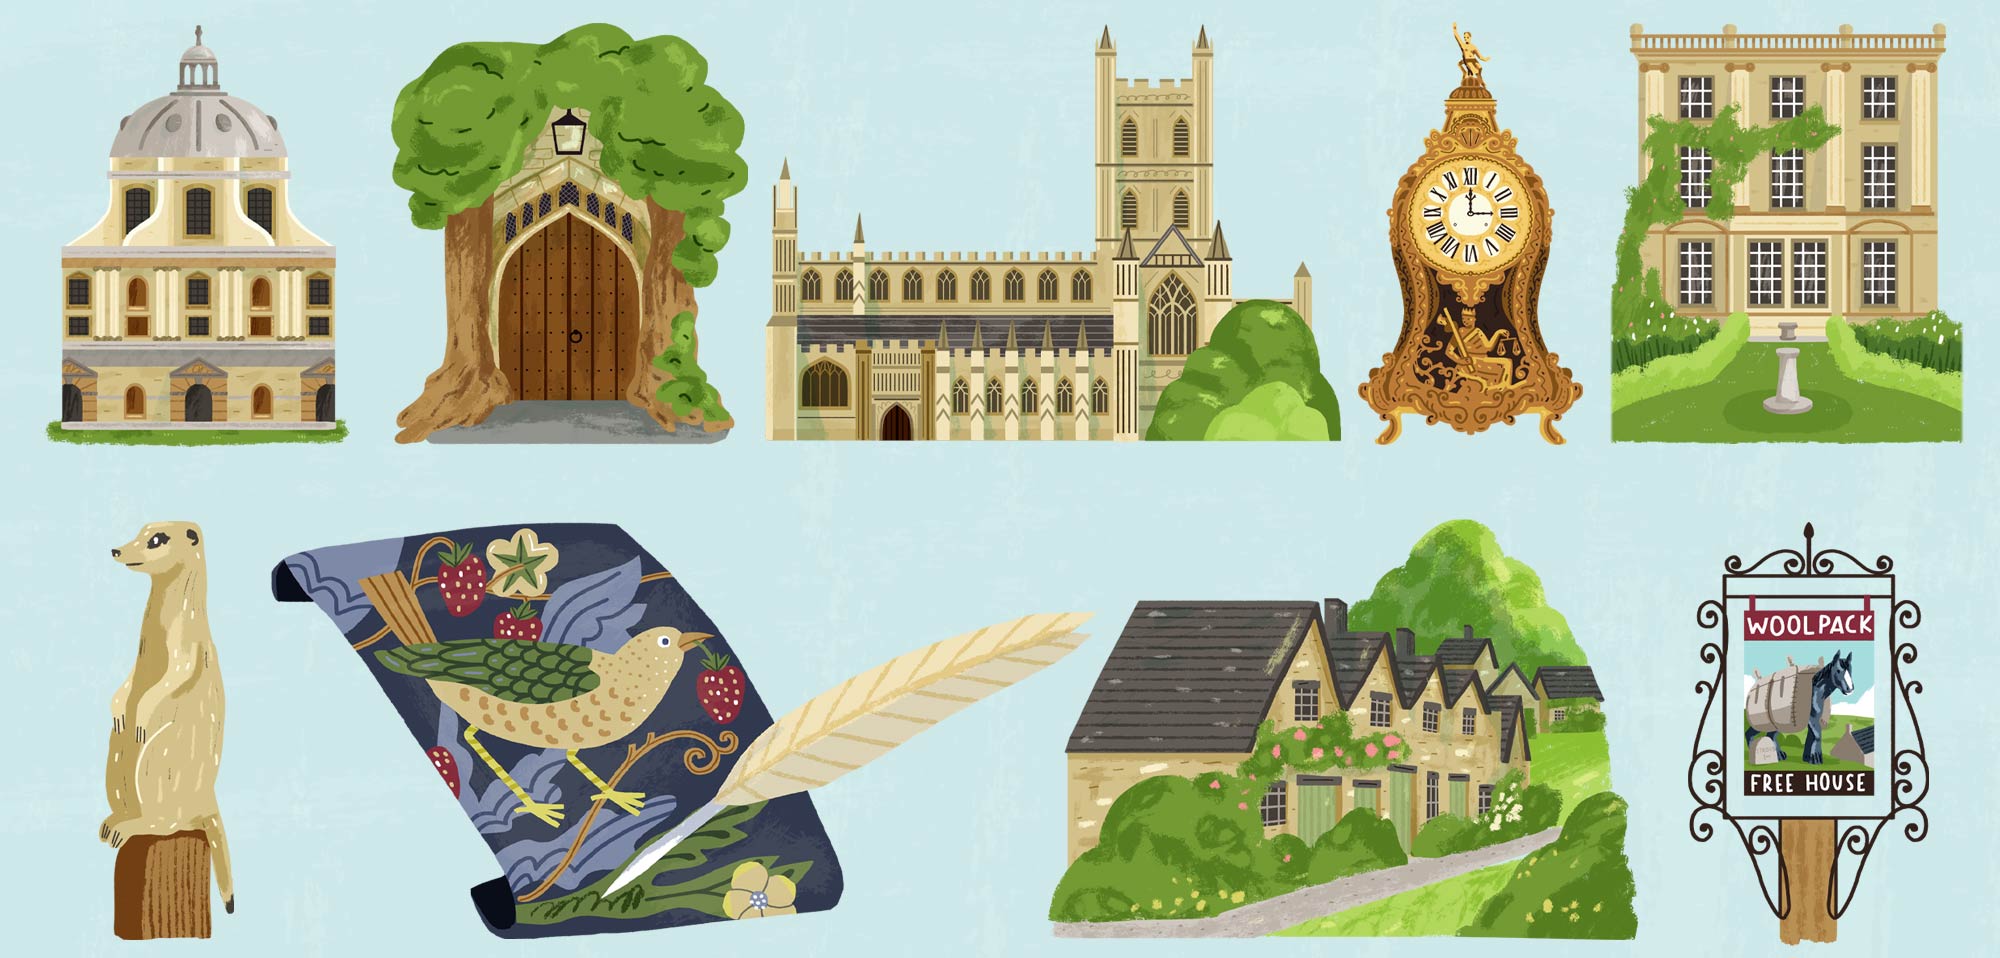 A closer look at the spot illustrations from a map of the Cotswolds by Elly Jahnz